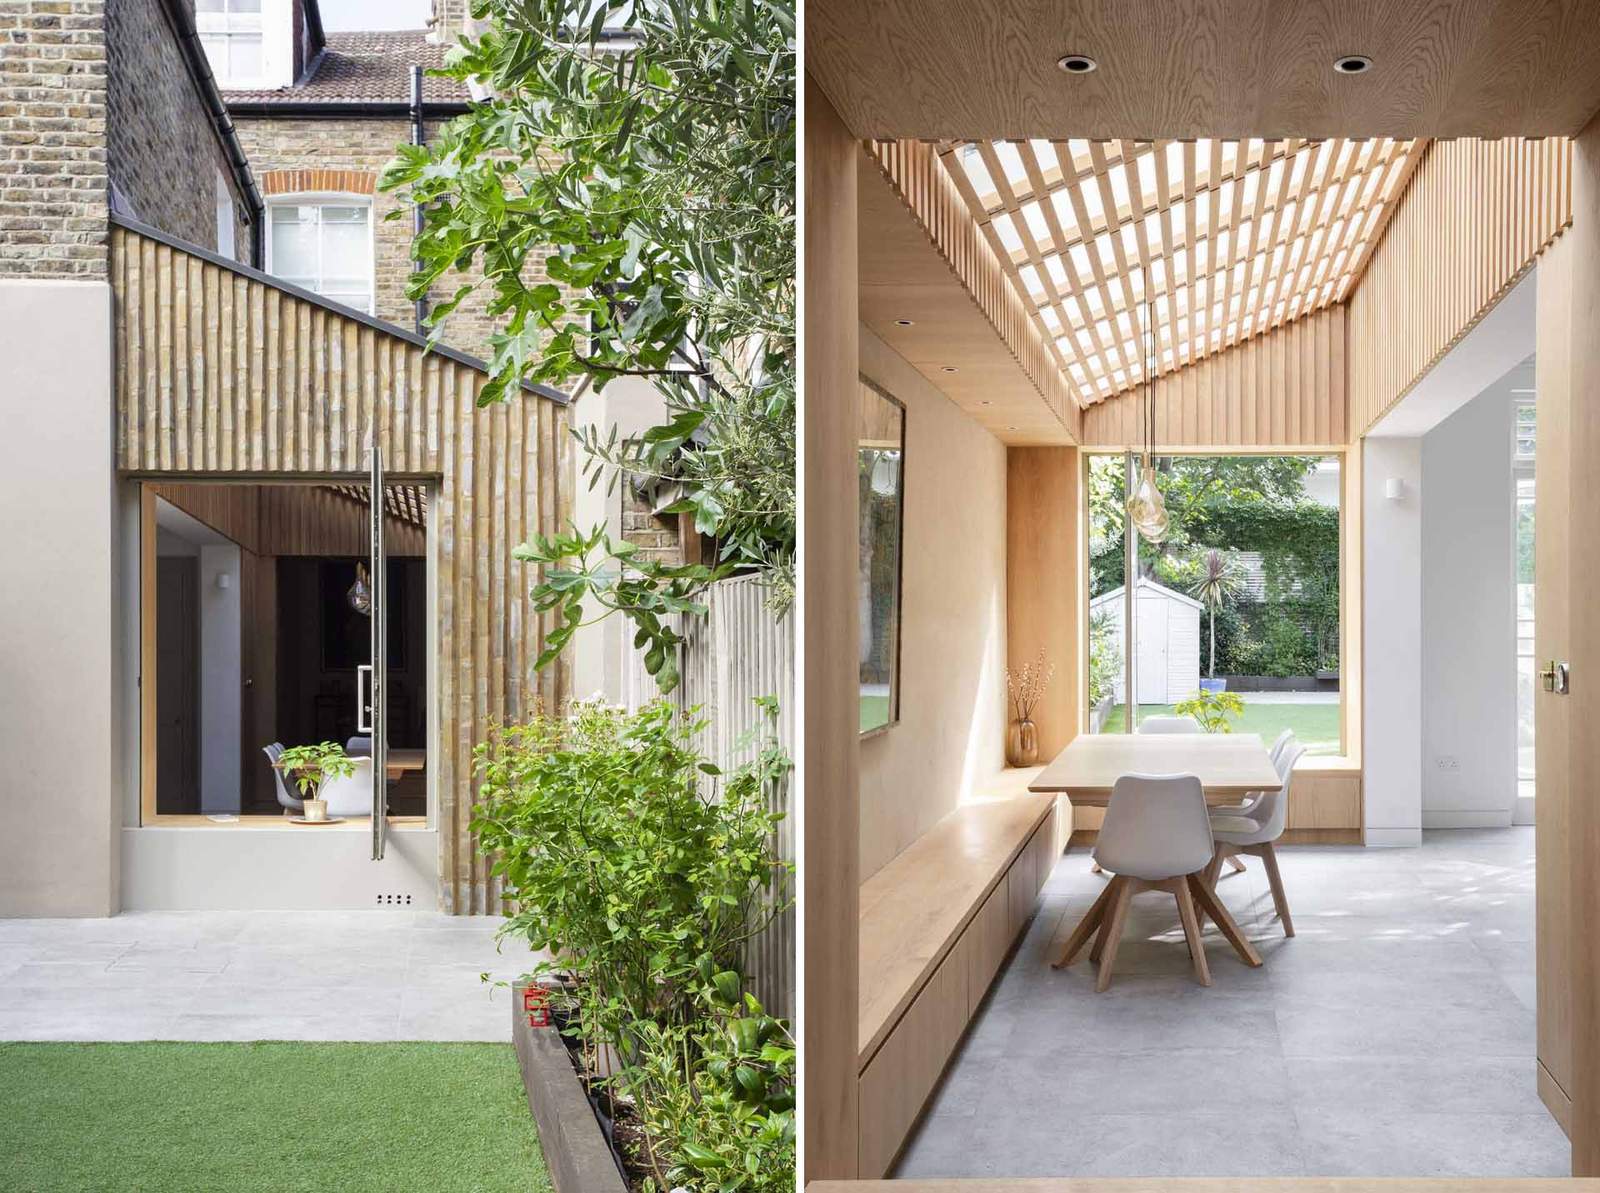 A Re-Imagined Side Extension With A Slatted Wood Design